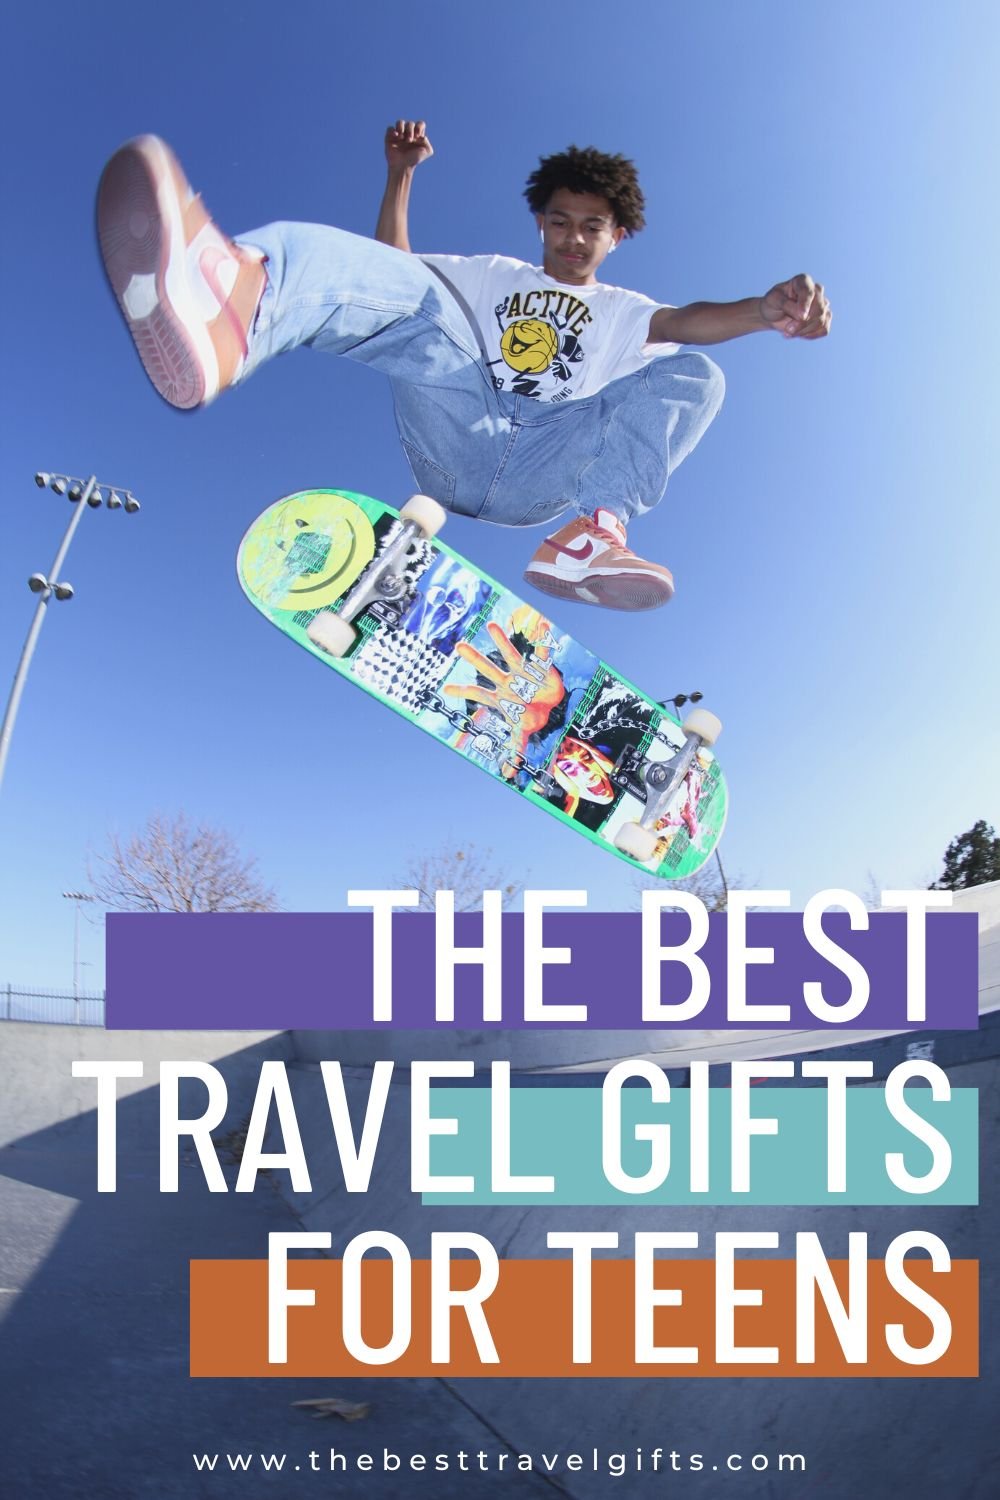 The best travel gifts for teens